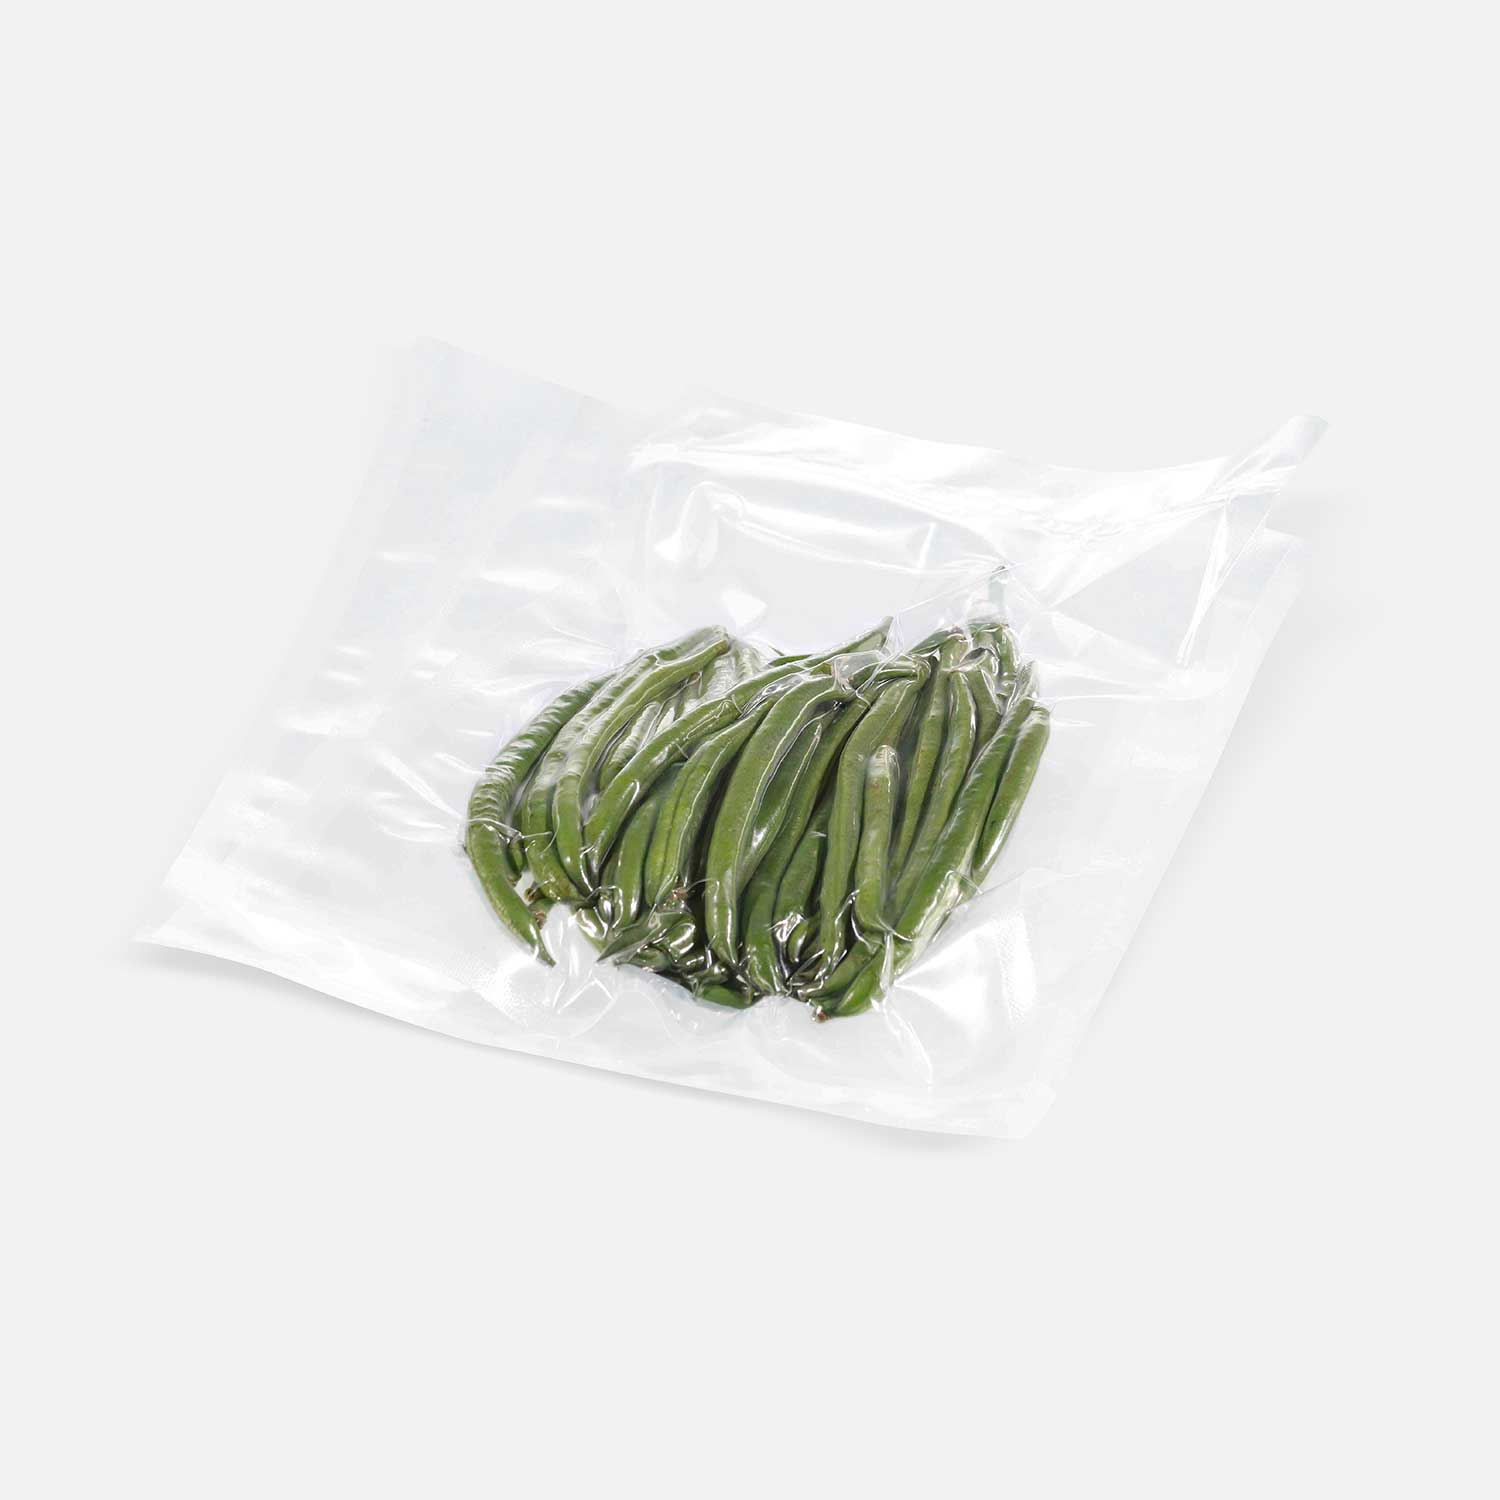 G-Vac vacuum bags with green beans vacuum-sealed